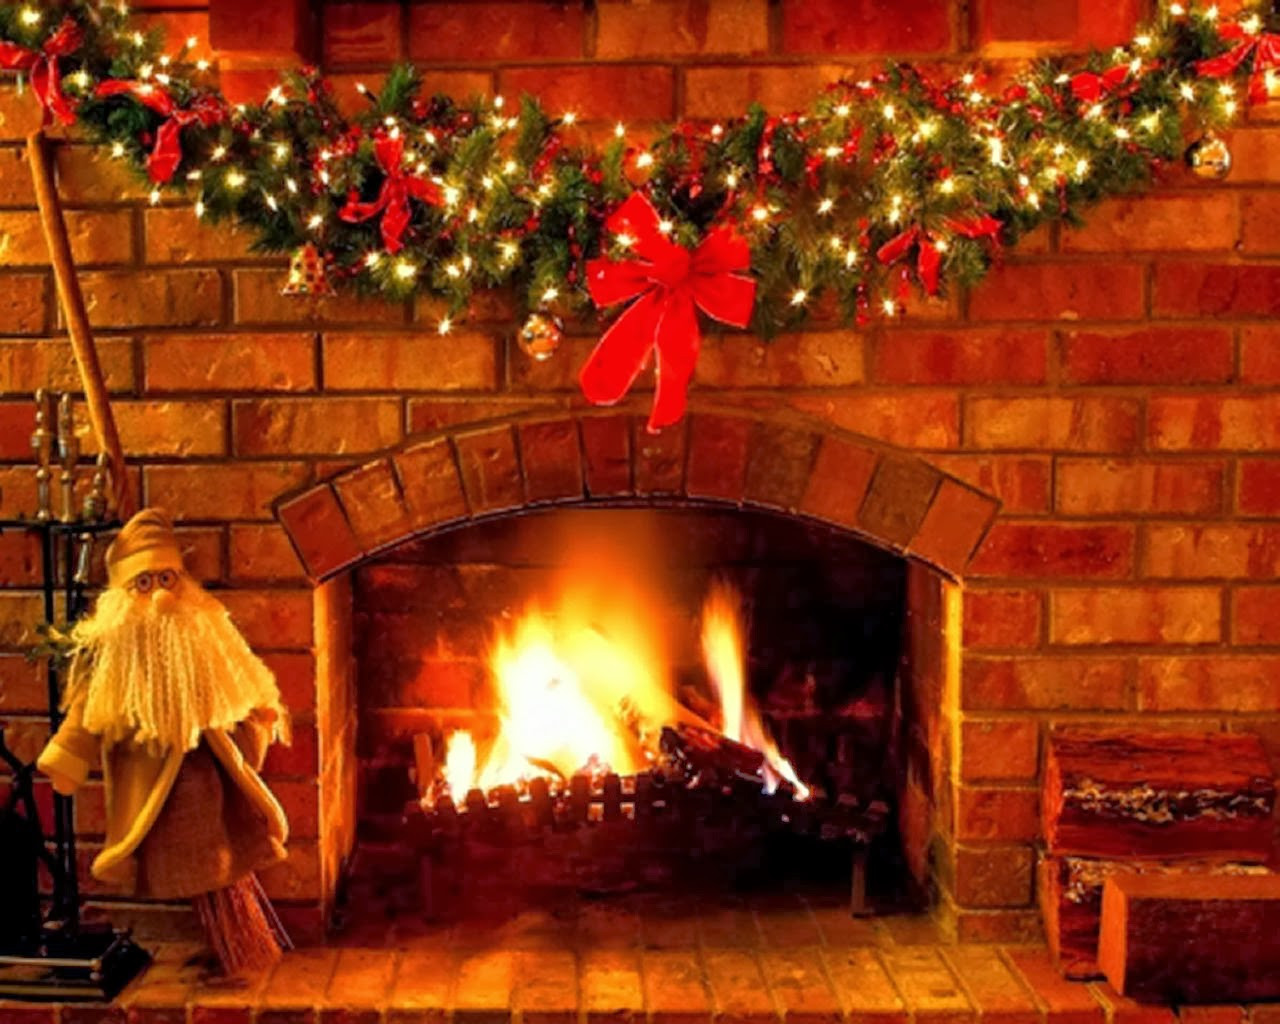 Fireplace At Christmas
 Christmas Fireplace Wallpaper – Wallpapers9